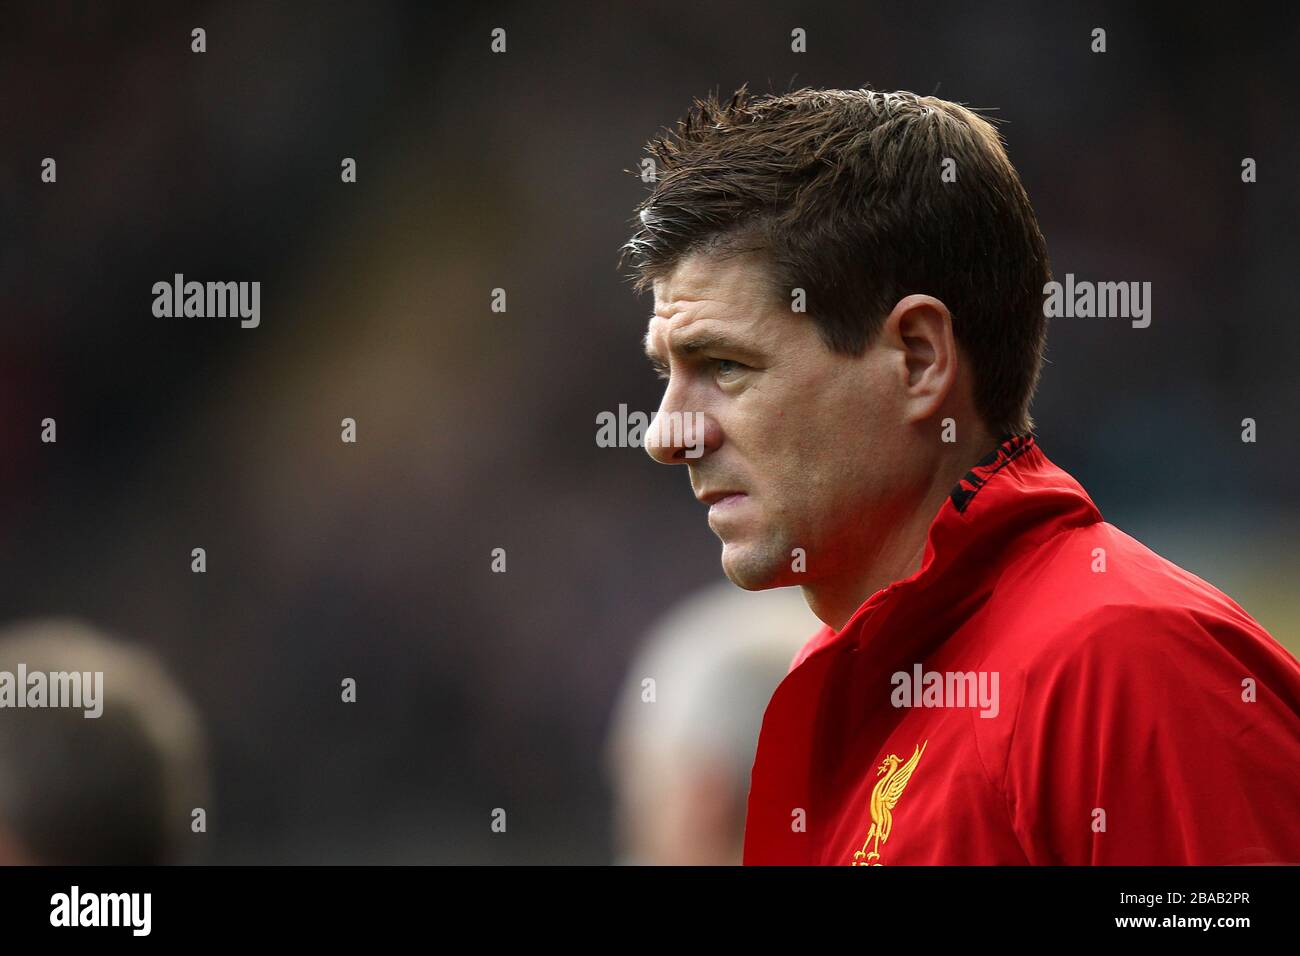 Steven Gerrard High Resolution Stock Photography and Images - Alamy